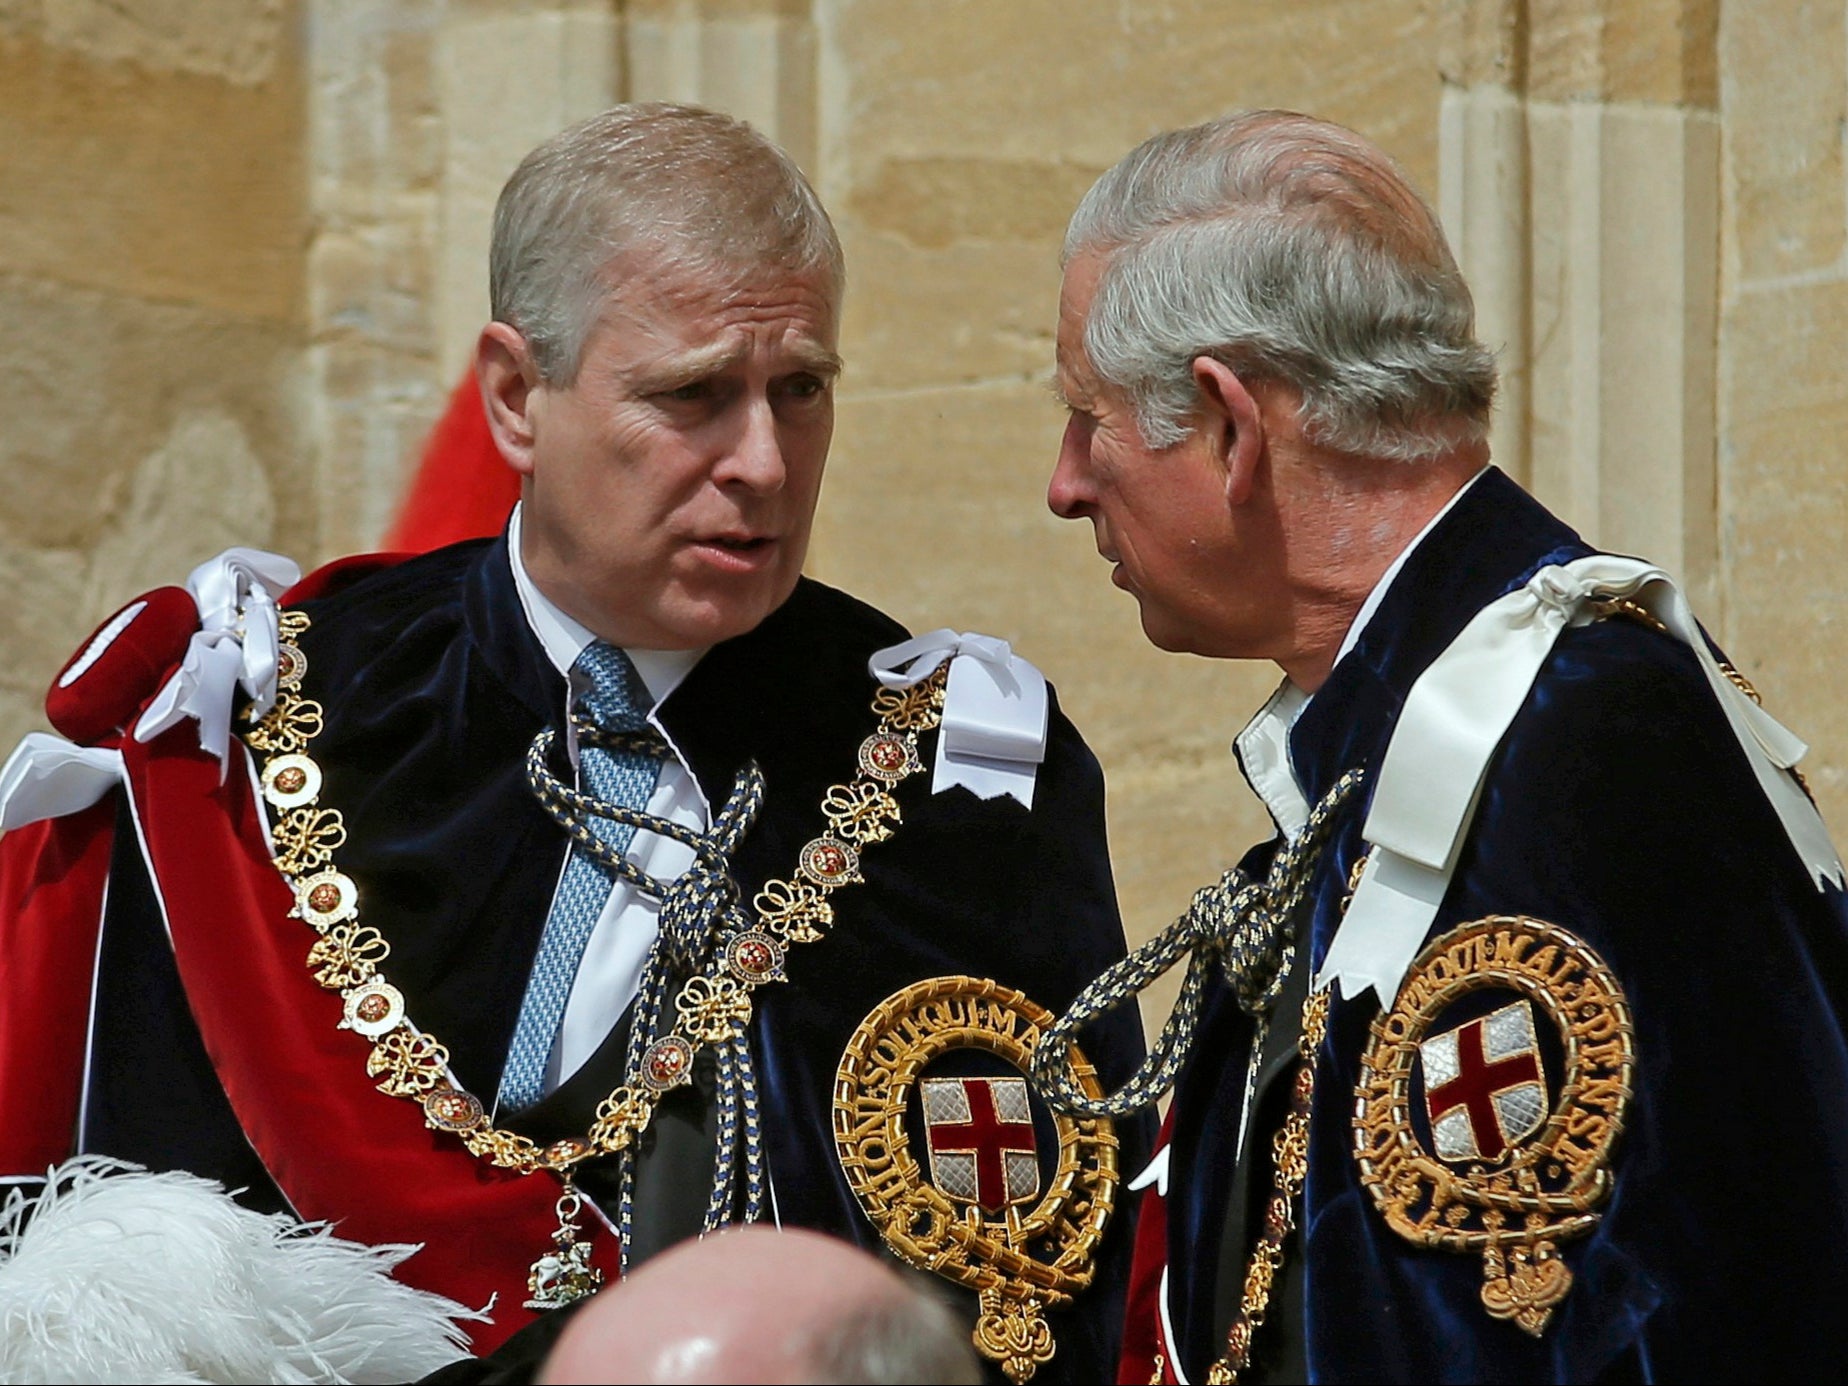 Prince Andrew with his brother Charles